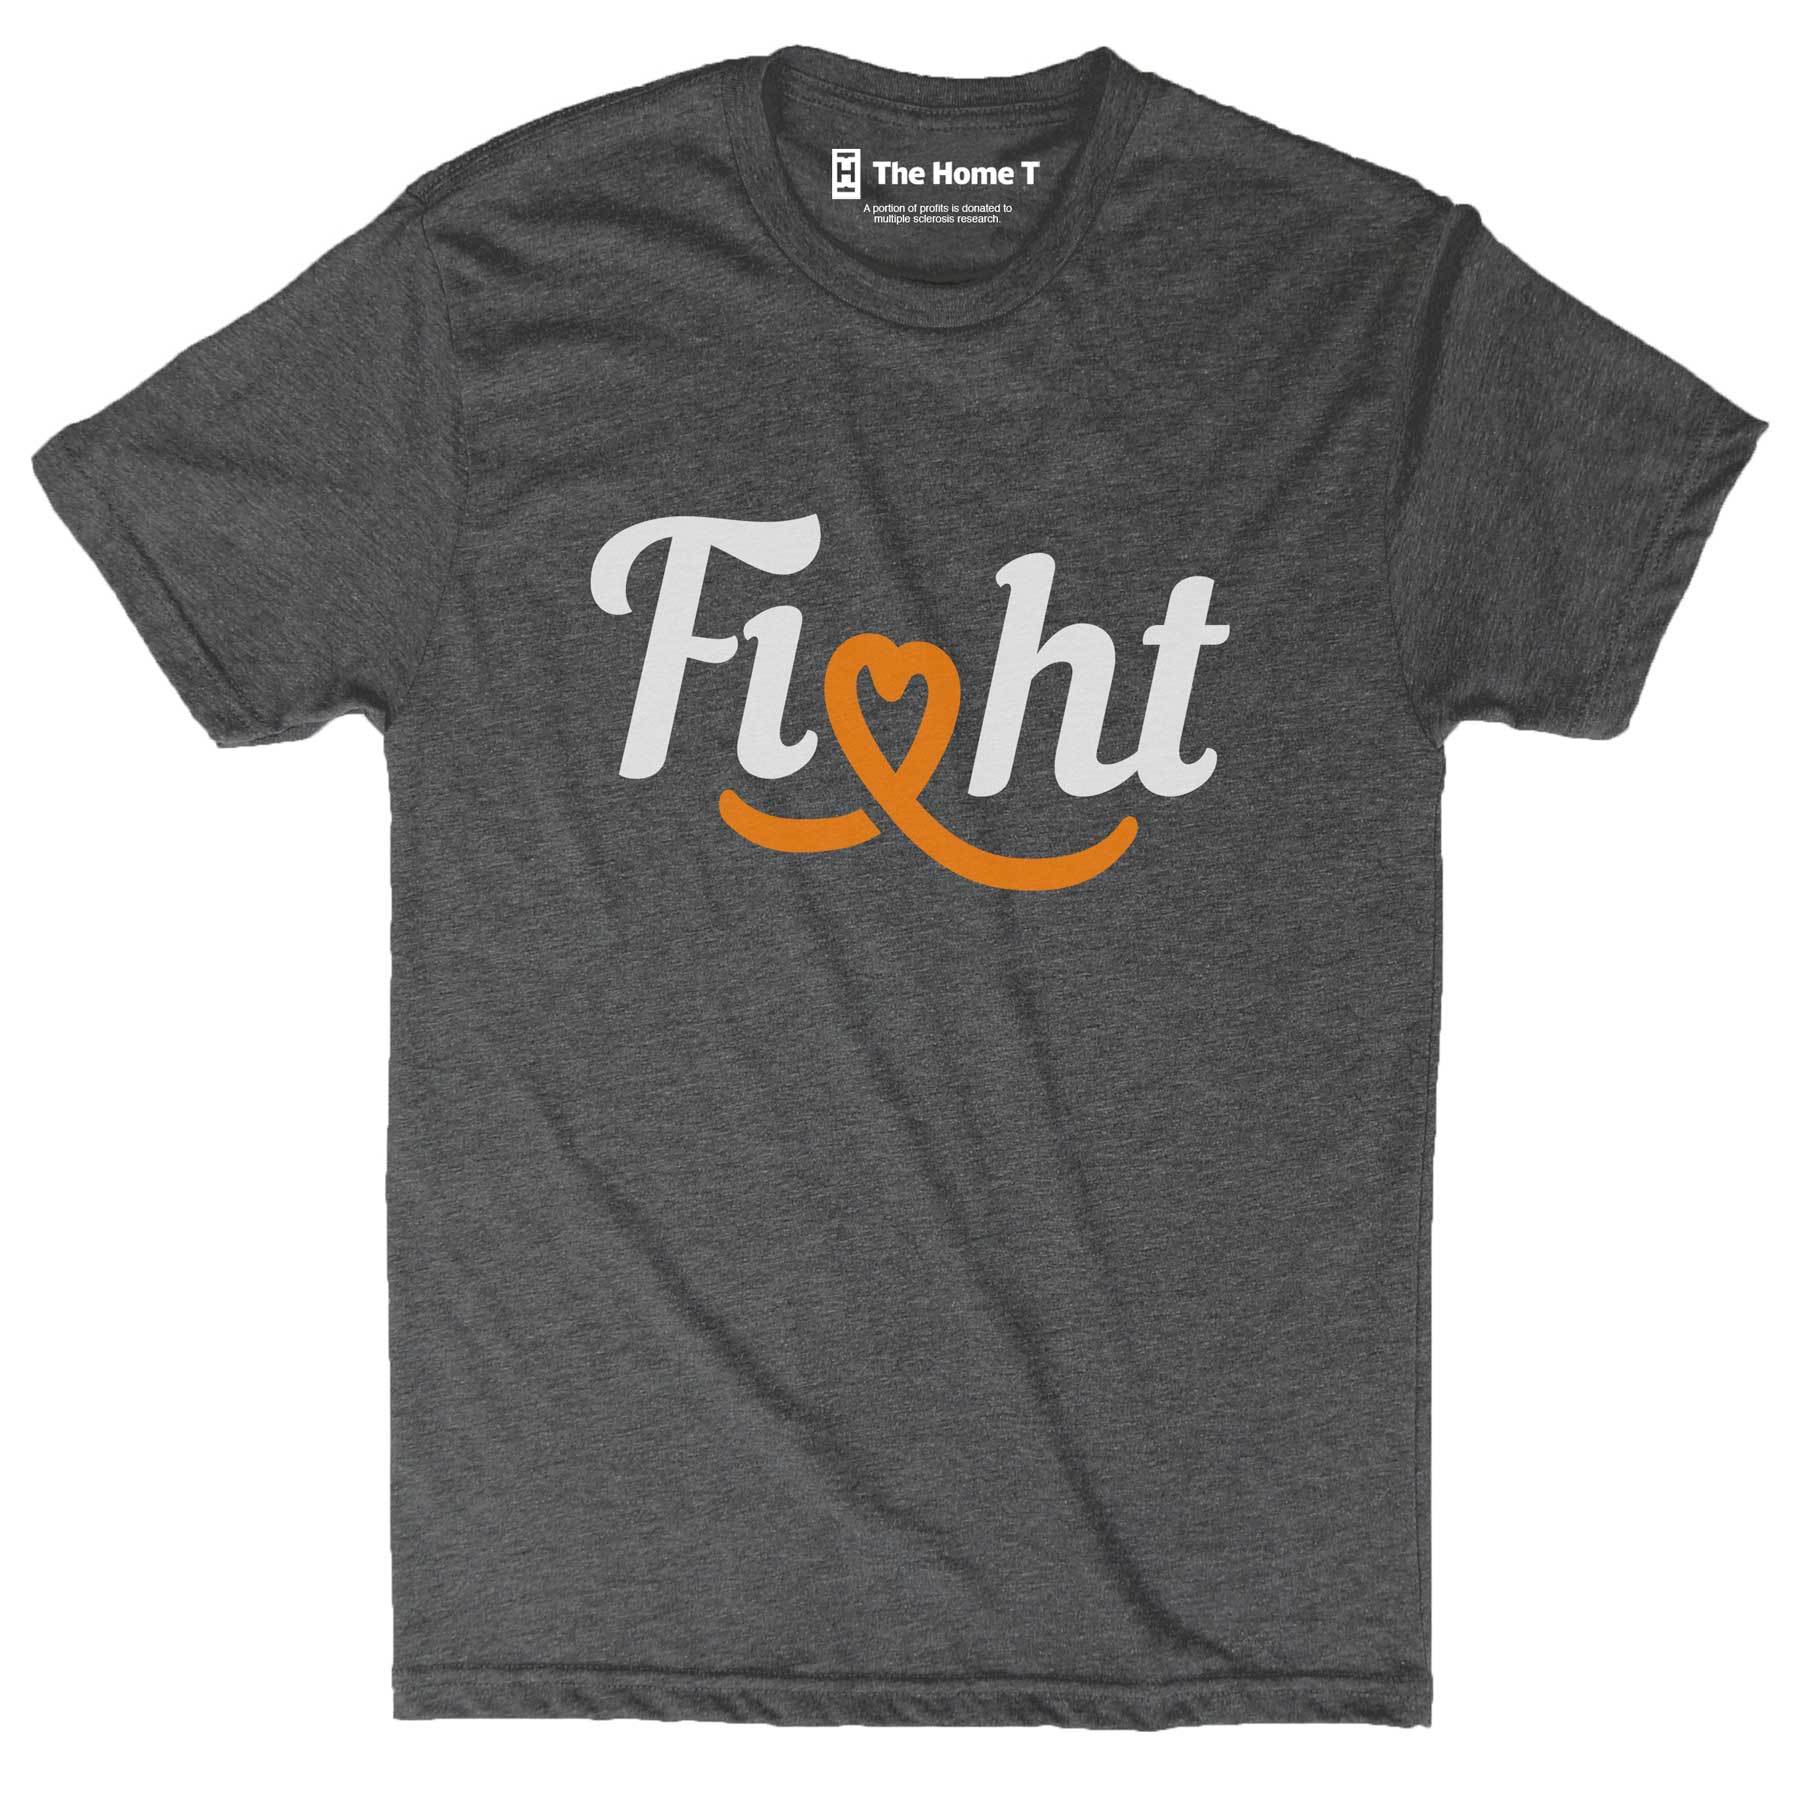 Fight Multiple Sclerosis